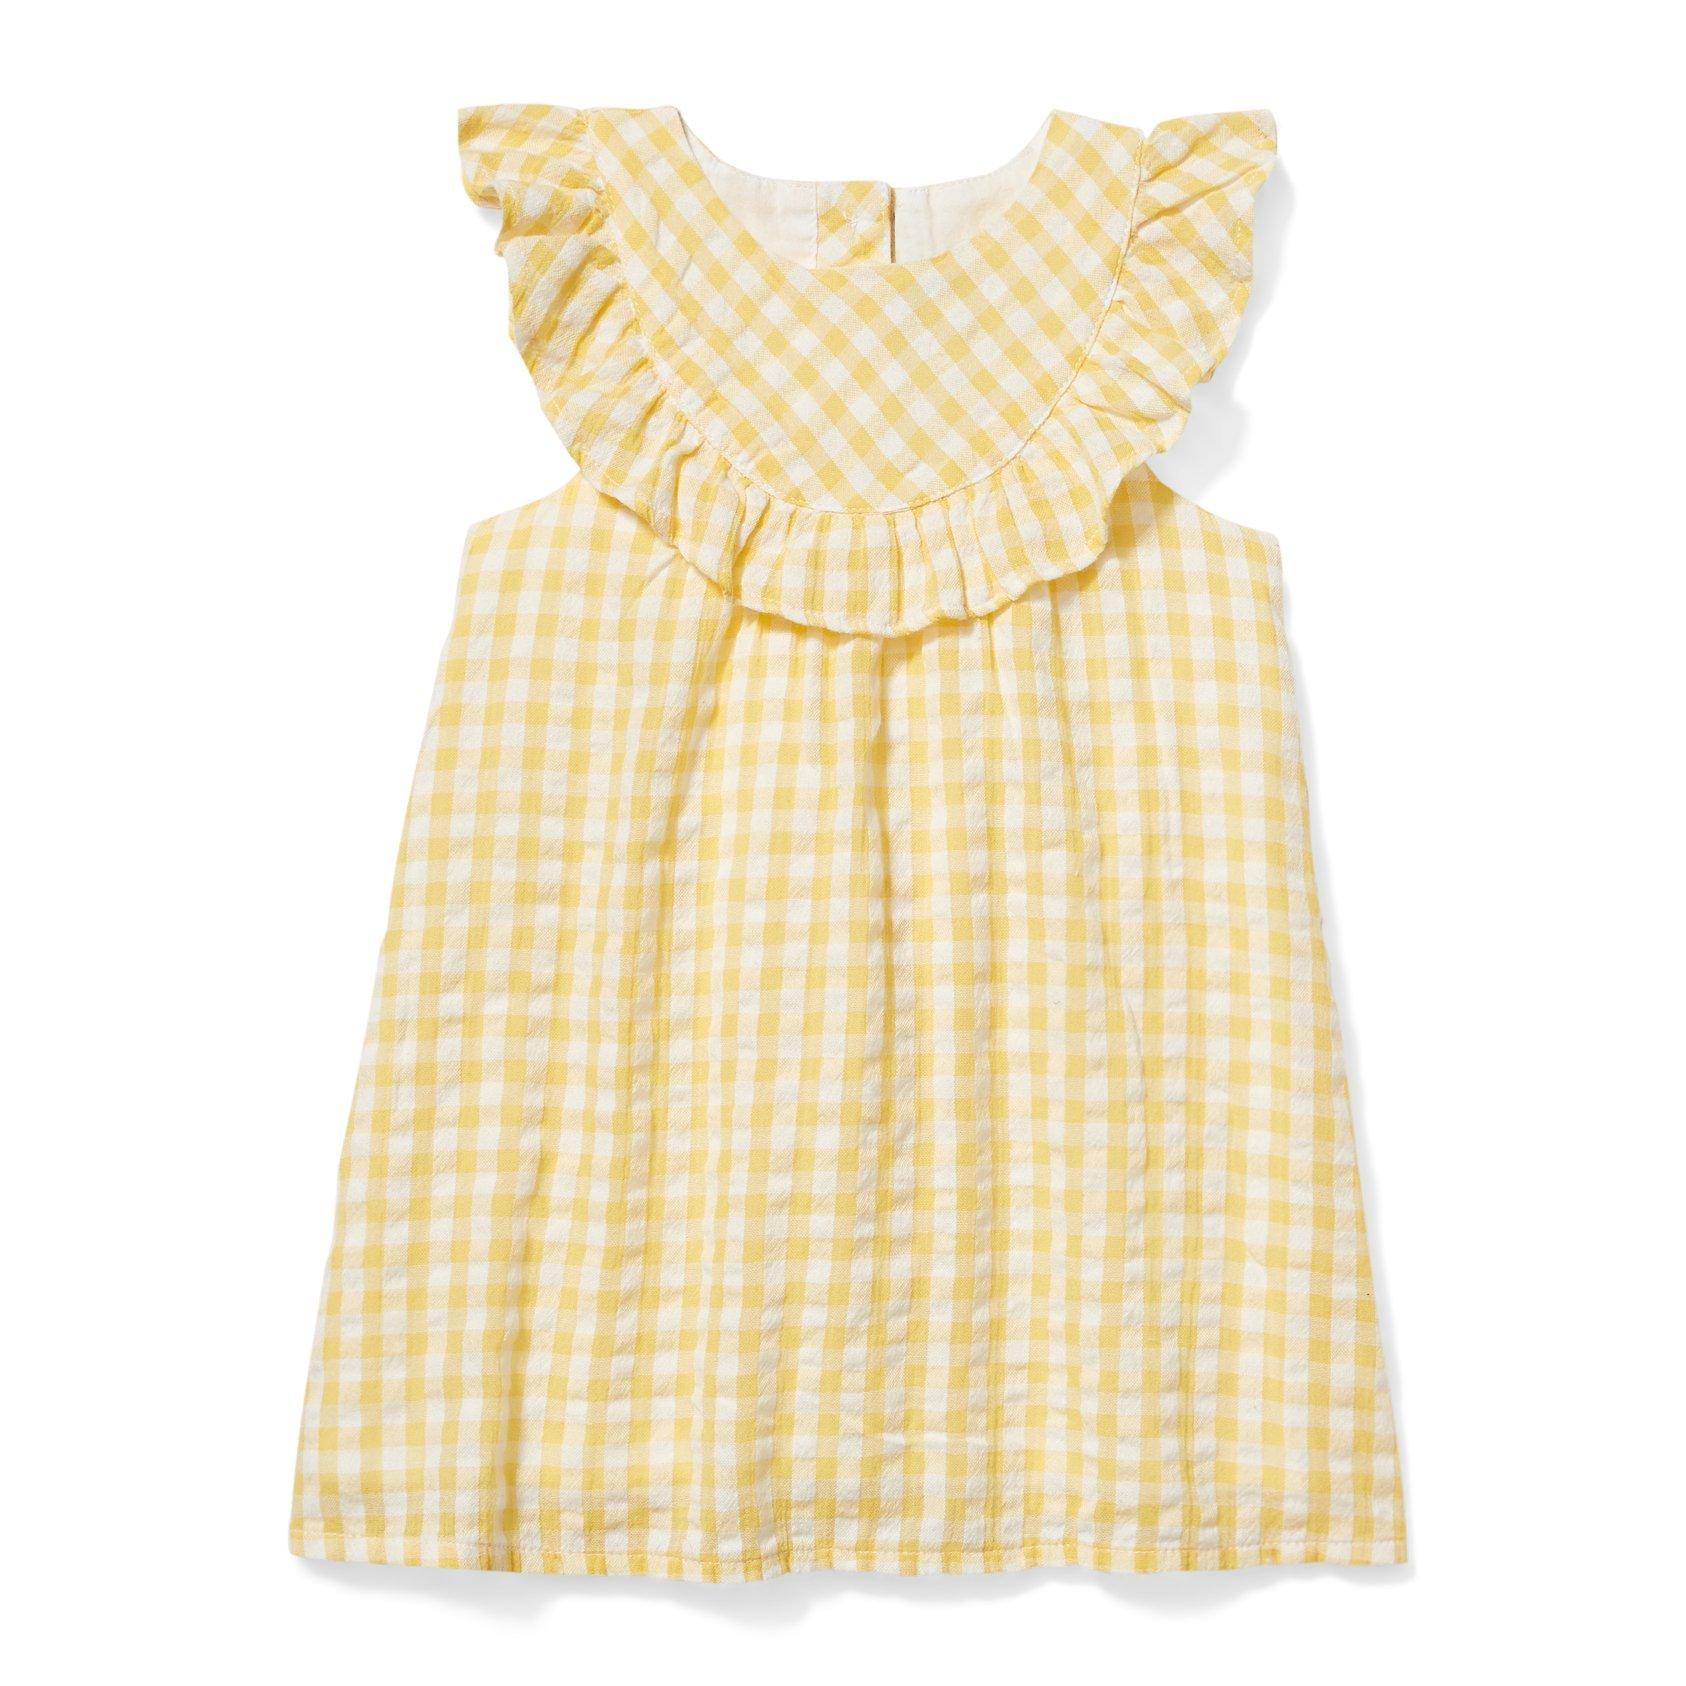 Newborn Shortbread Gingham Baby Gingham Dress by Janie and Jack